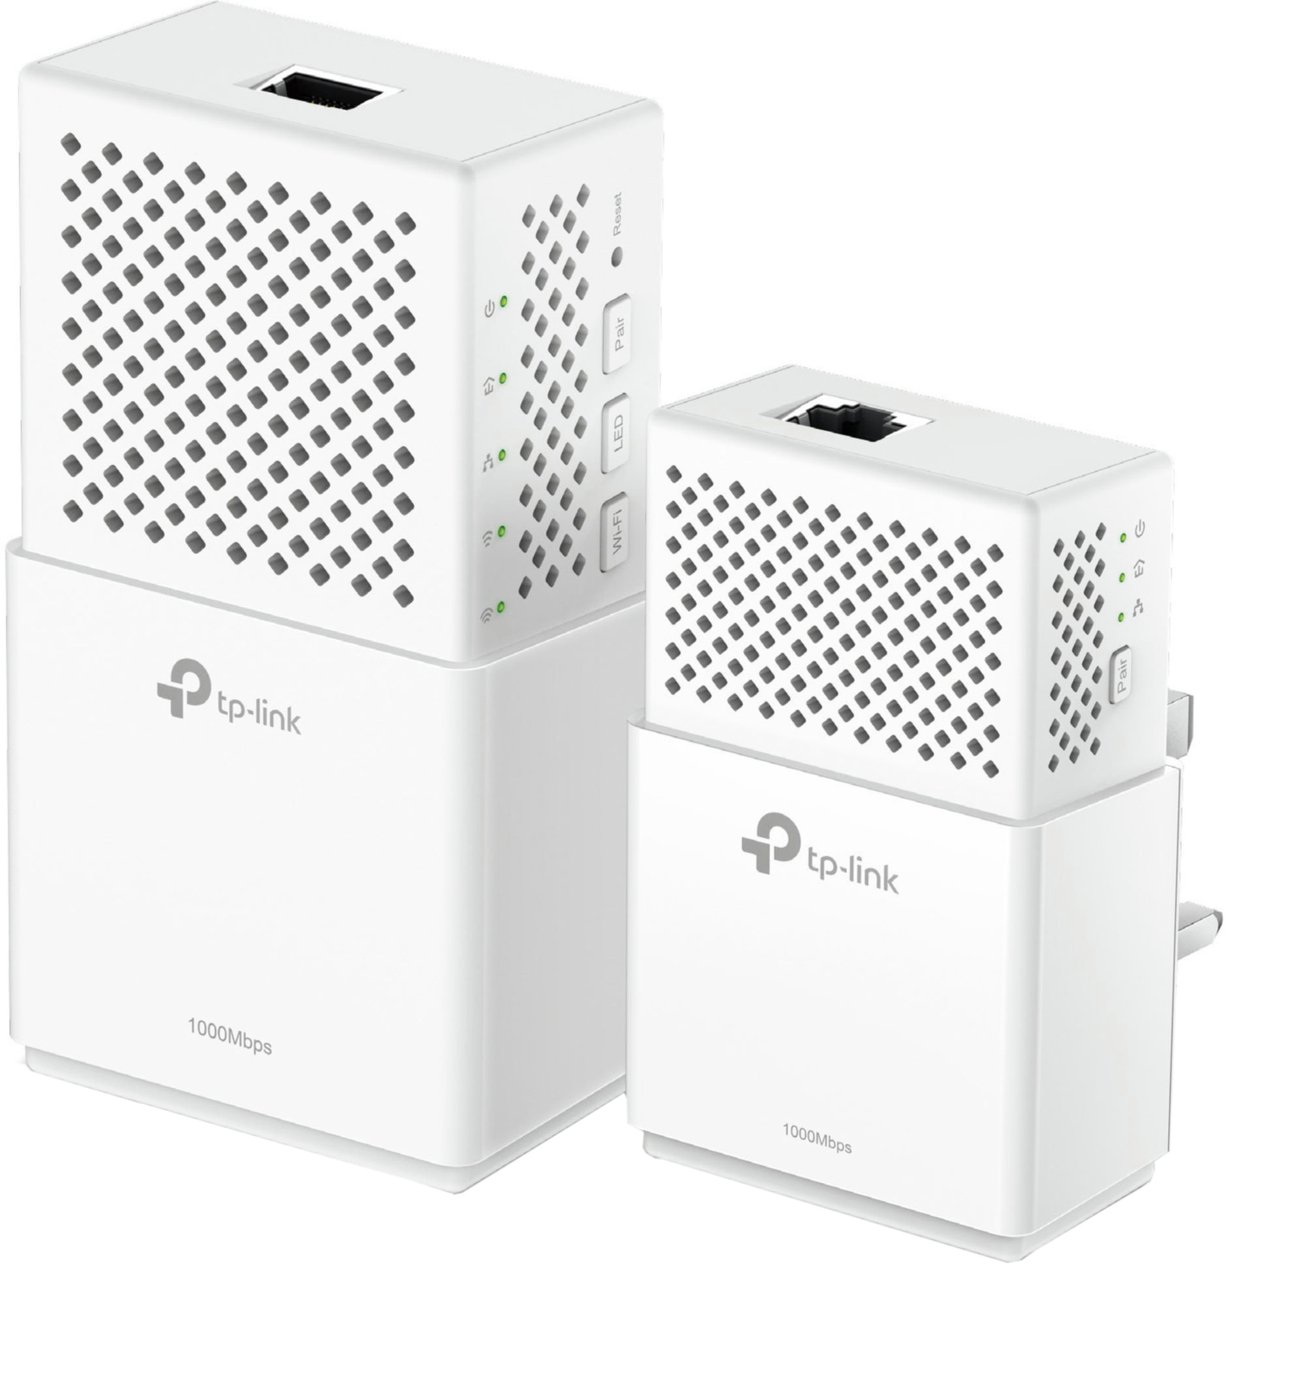 TP-Link AC750 Wi-Fi Extender Booster & 1GB Powerline Kit Review